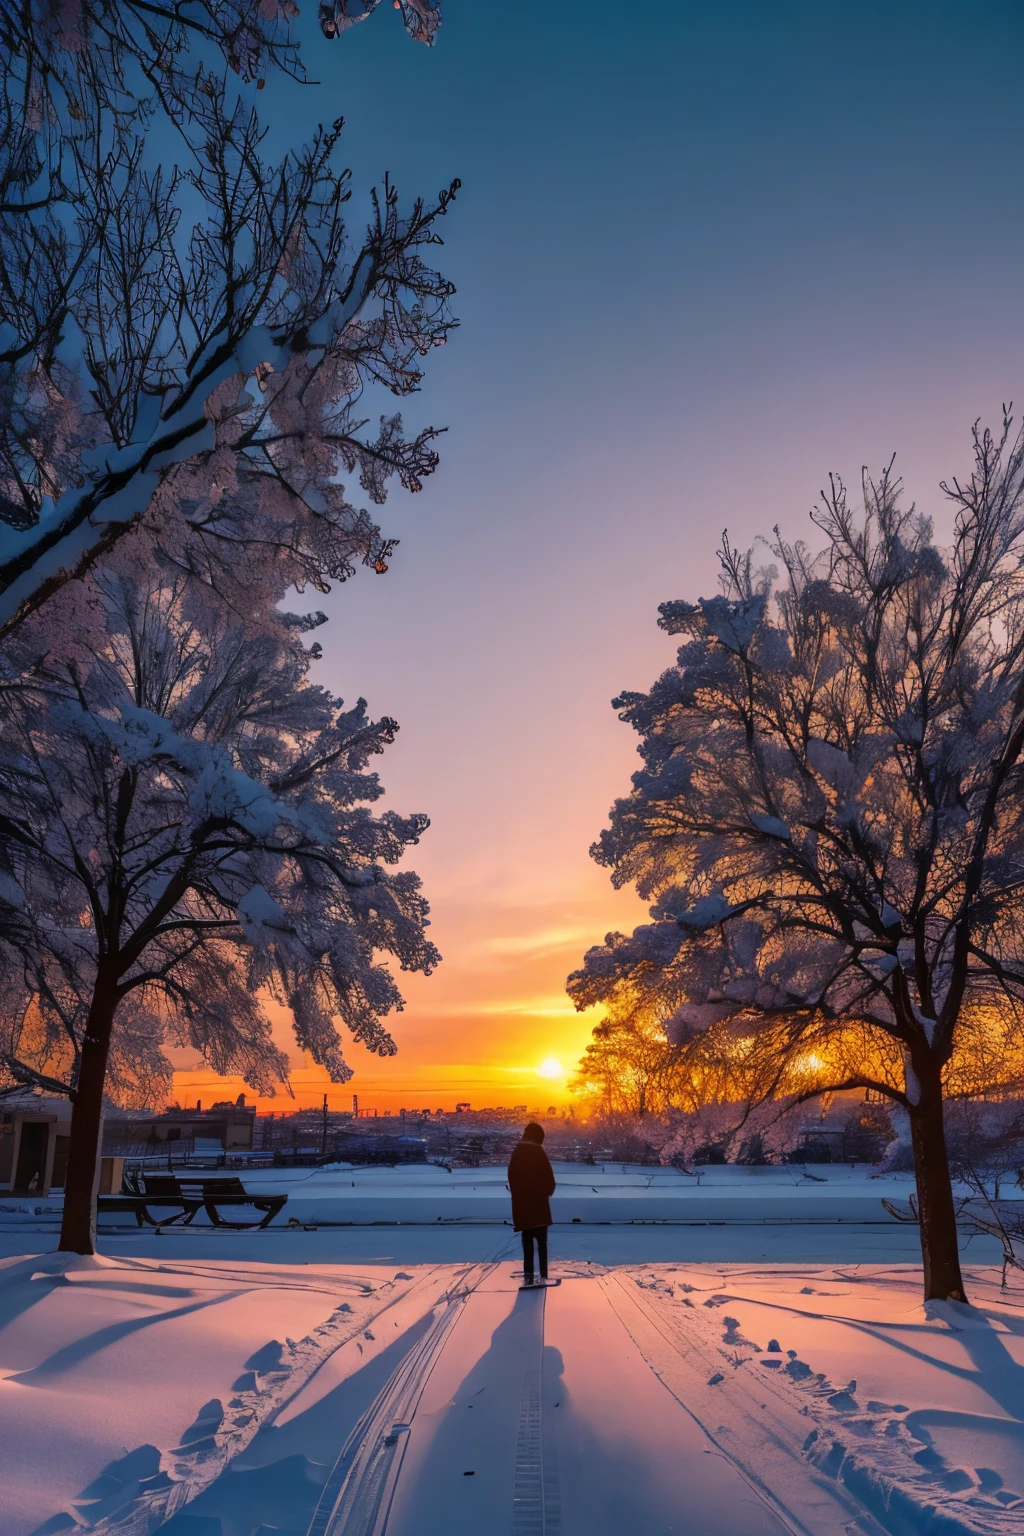 (Best quality at best,4K,8K,A high resolution,tmasterpiece:1.2),ultra - detailed,(actual,photoactual,photo-actual:1.37),The last sunset before departure,winter sky at sunset,pastelcolor,pink orange,blue,thin fog,rows of trees and buildings,Peaceful atmosphere,Peaceful winter landscape,Subtle tones,The fading sunshine,golden time,quiet street,light wind,warm kiss,City silhouette,Icy branches,Elegant architecture,longing mood,Majestic skyline,Little snowflakes dance lightly,last goodbye.